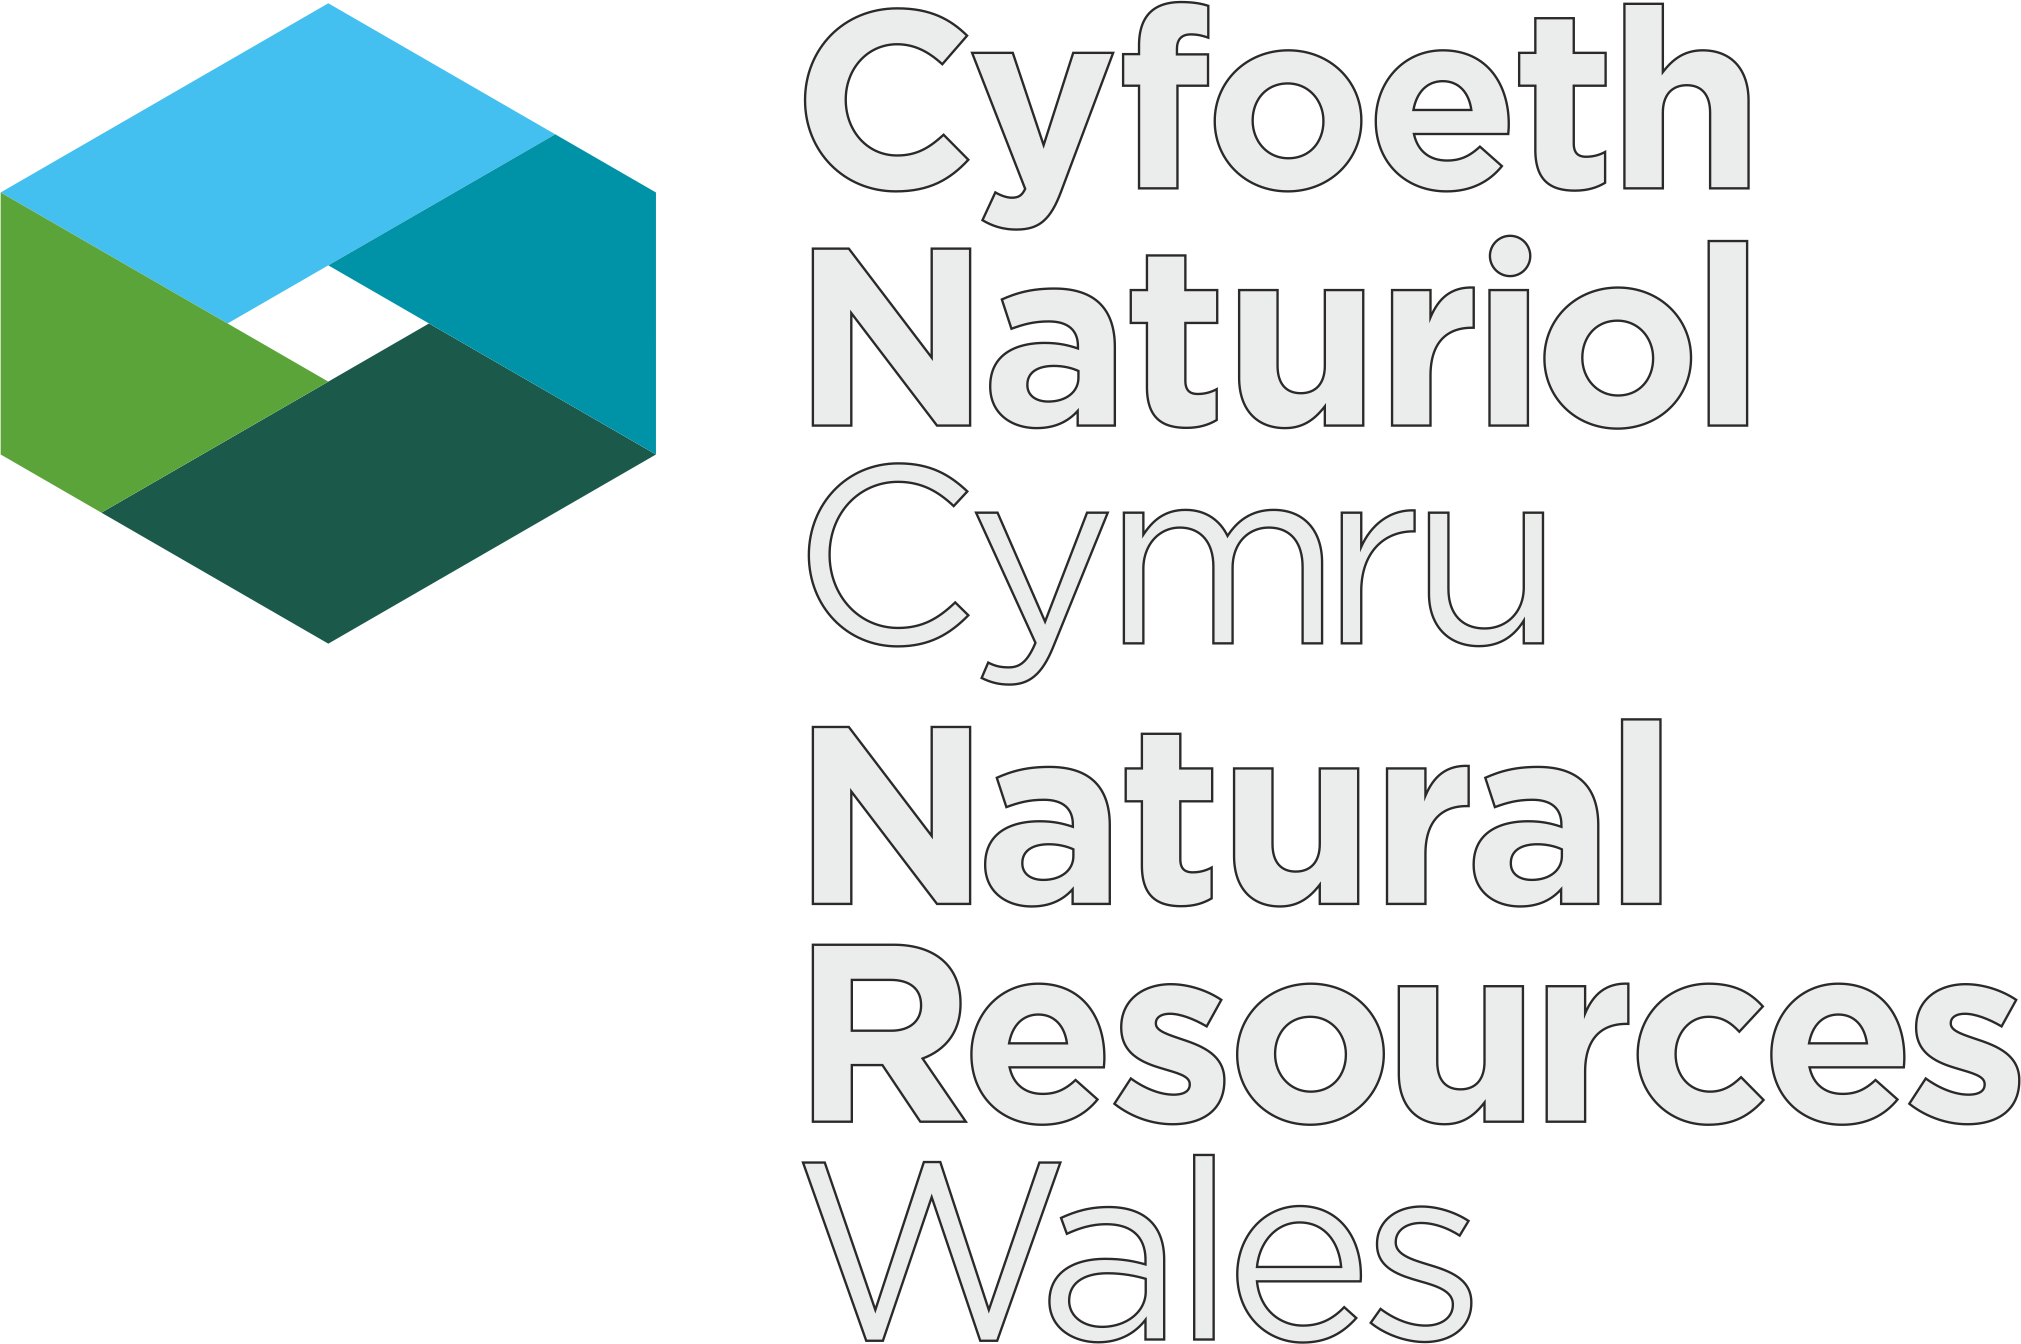 The logo of Natural Resources Wales